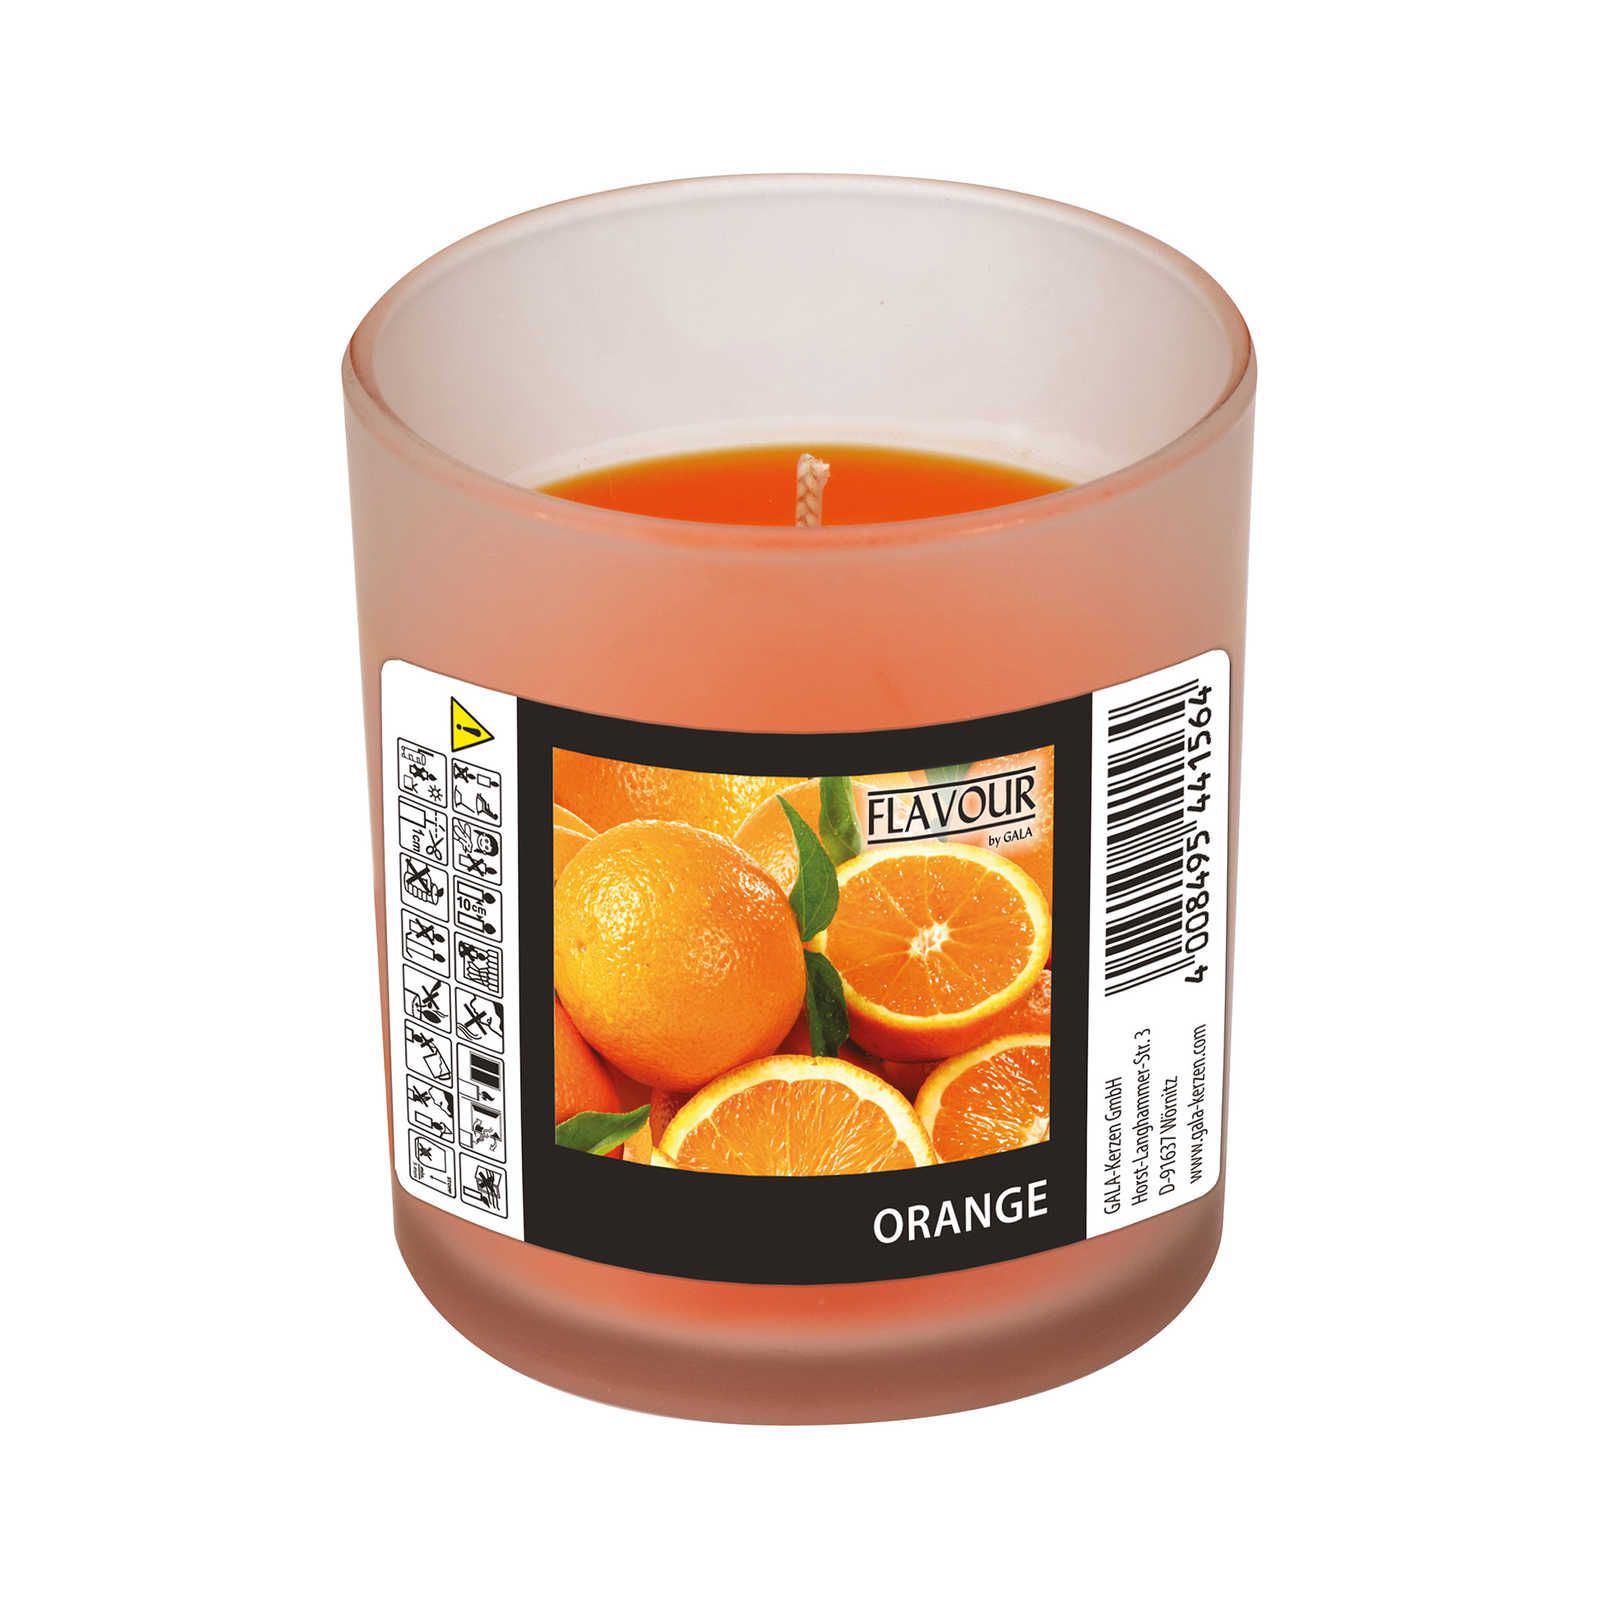             Orange Scented Candle with Mood Uplifting Fragrance - 110g
        